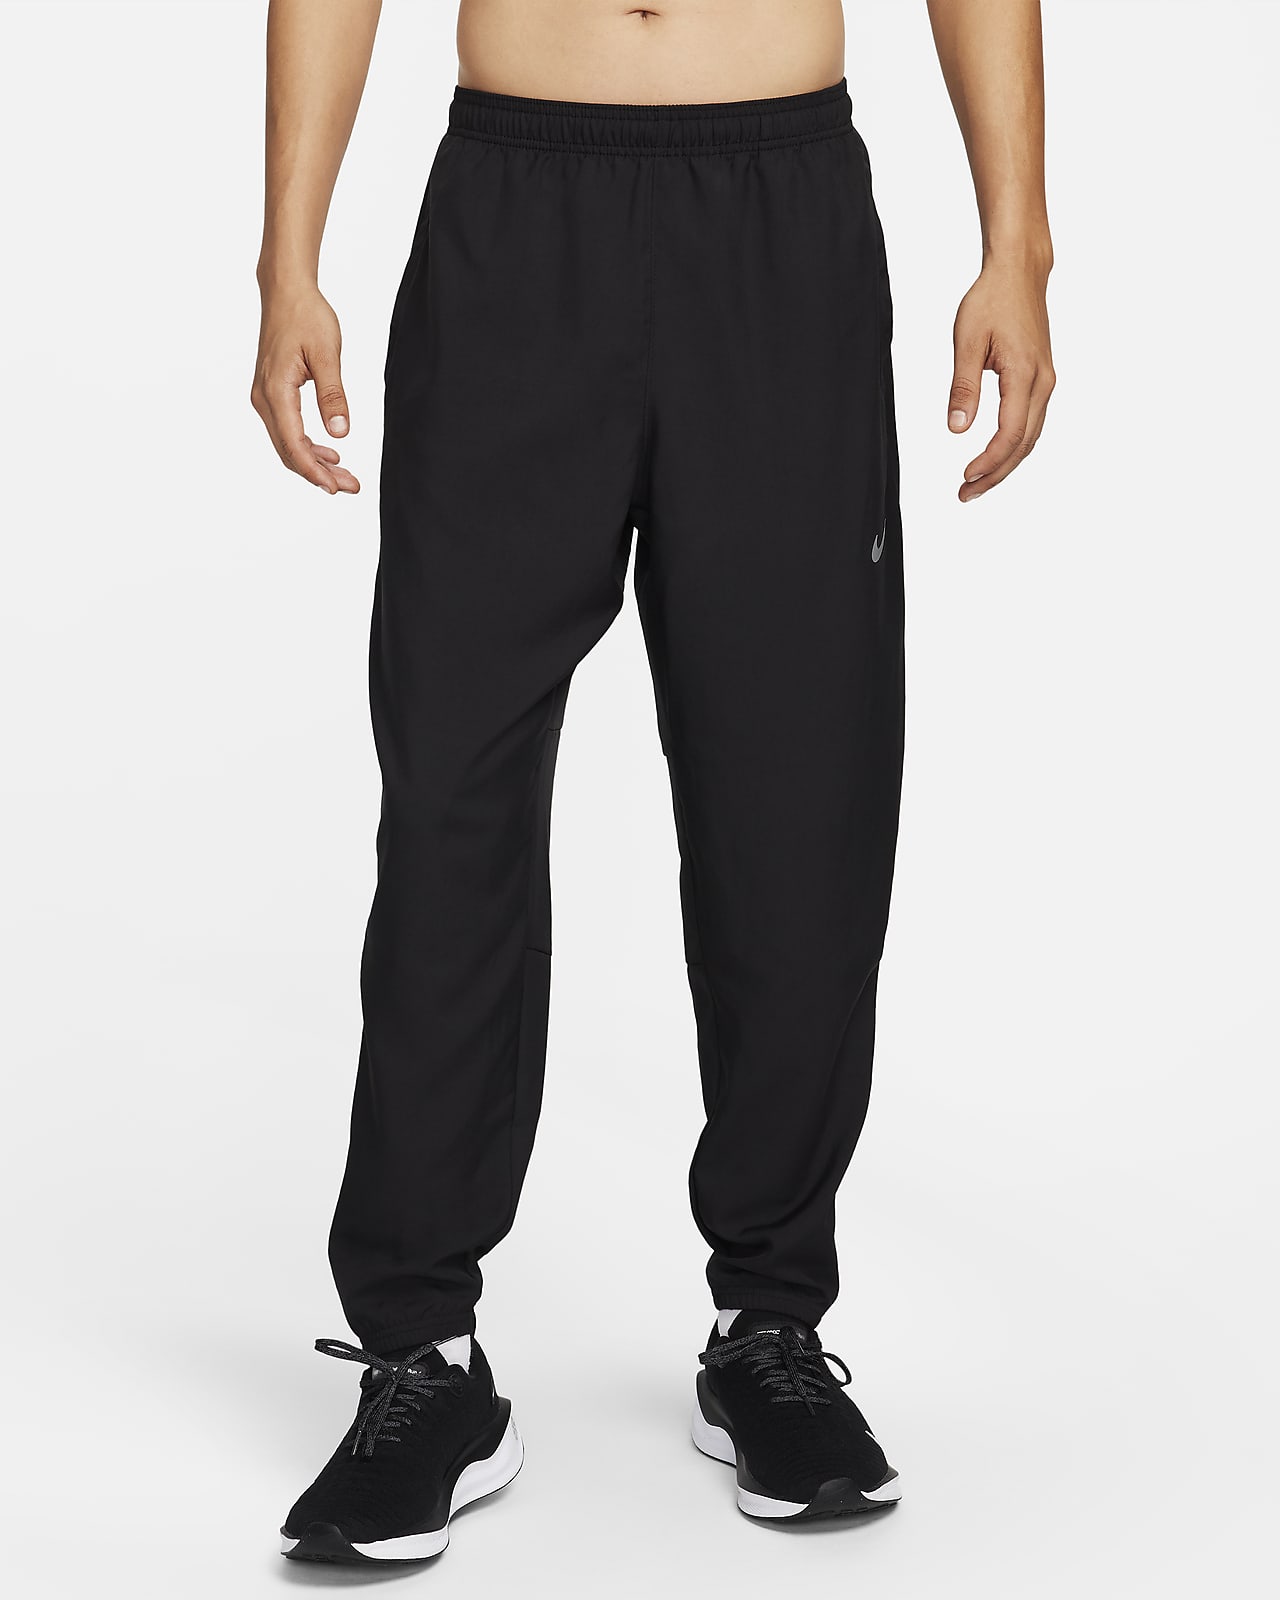 WTS][USA-CA] Nike Challenger Dri-Fit Tights, Under Armour and